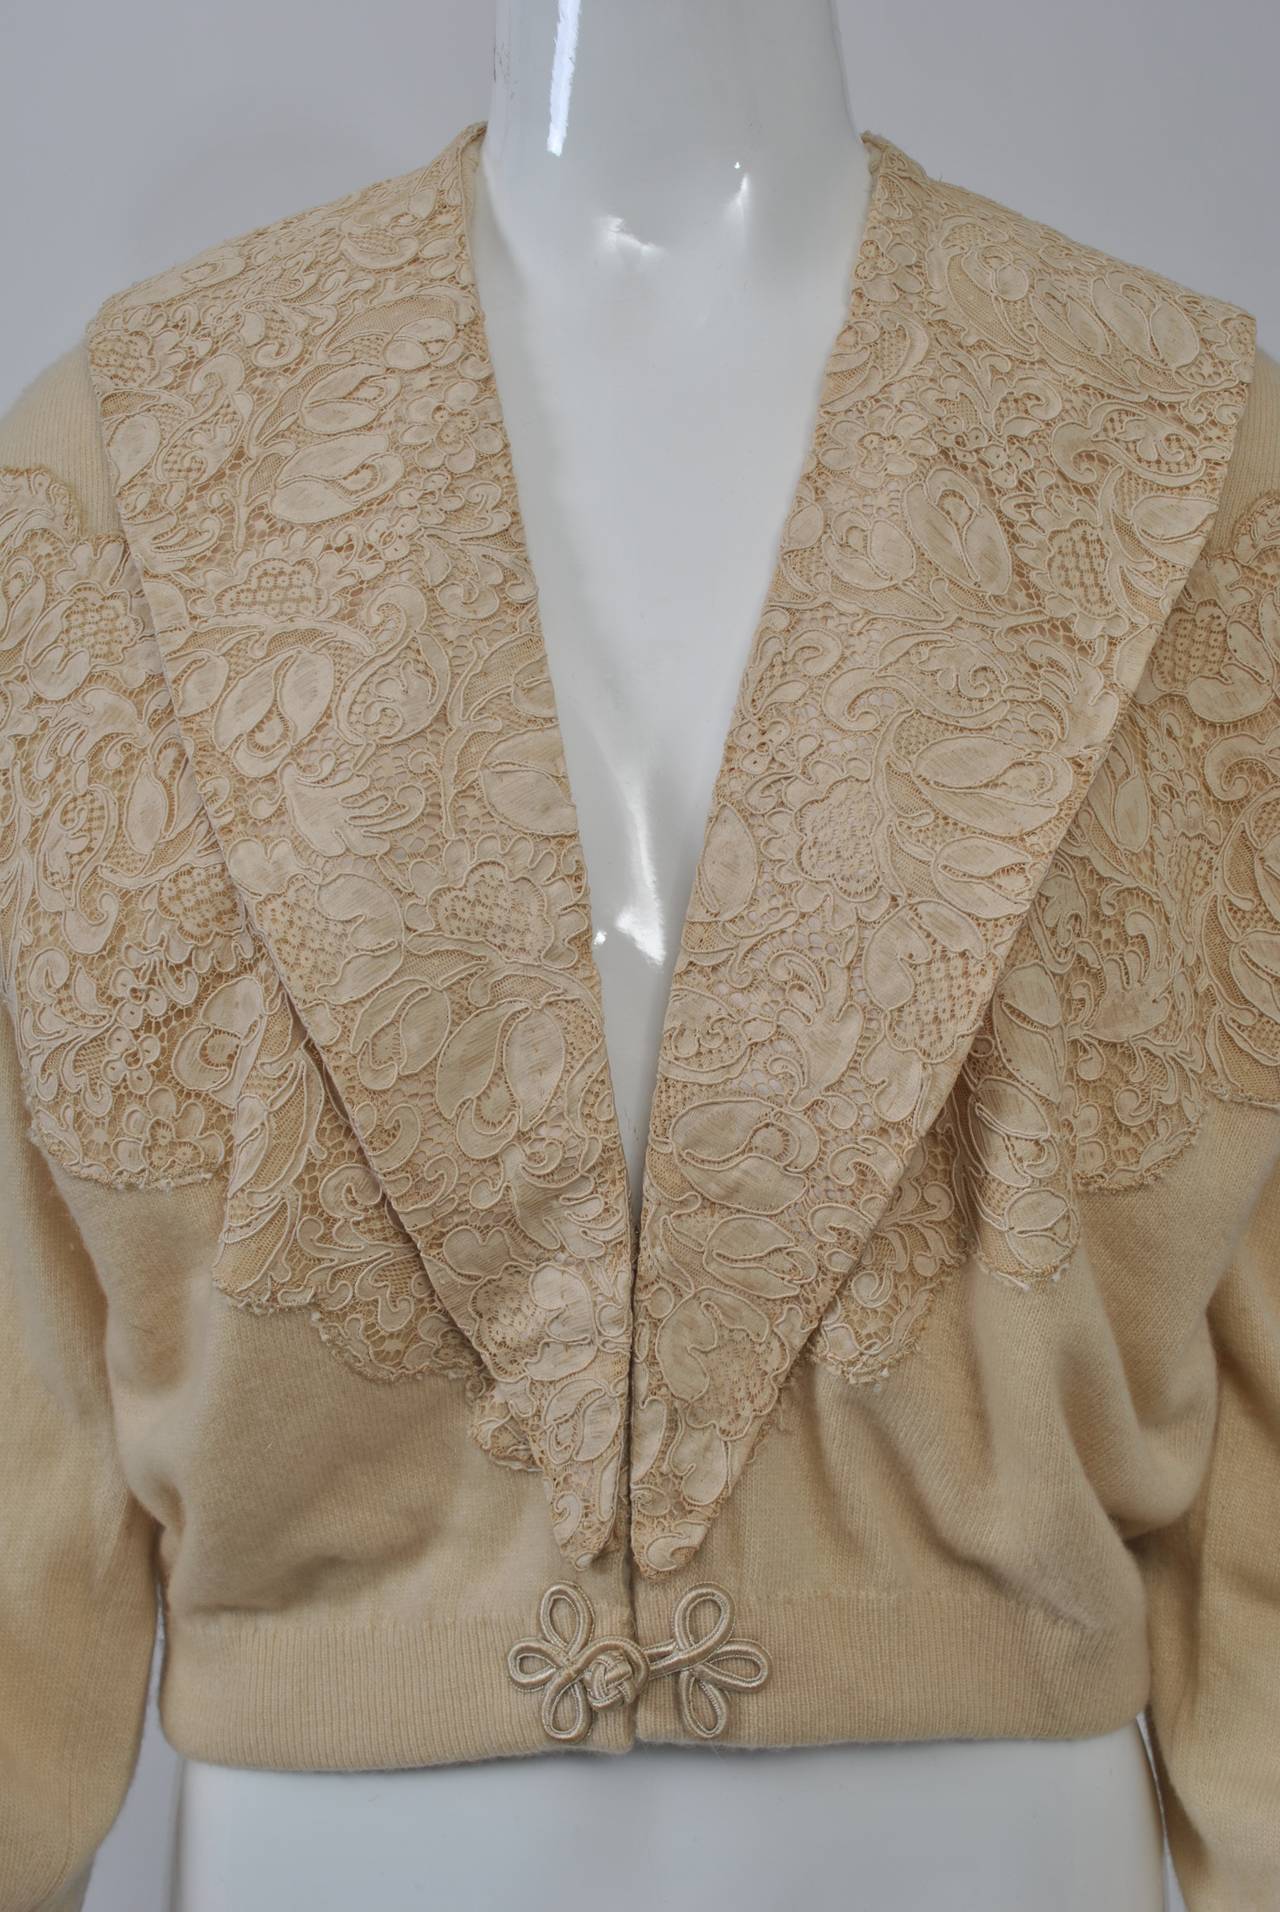 An unusual version of the decorated sweaters from the 1950s-'60s, many of which have a detachable fur collar, this beige cashmere cardigan has lace trim and a lace shawl collar that snaps on and off. Frog closure at waist and satin buttons at